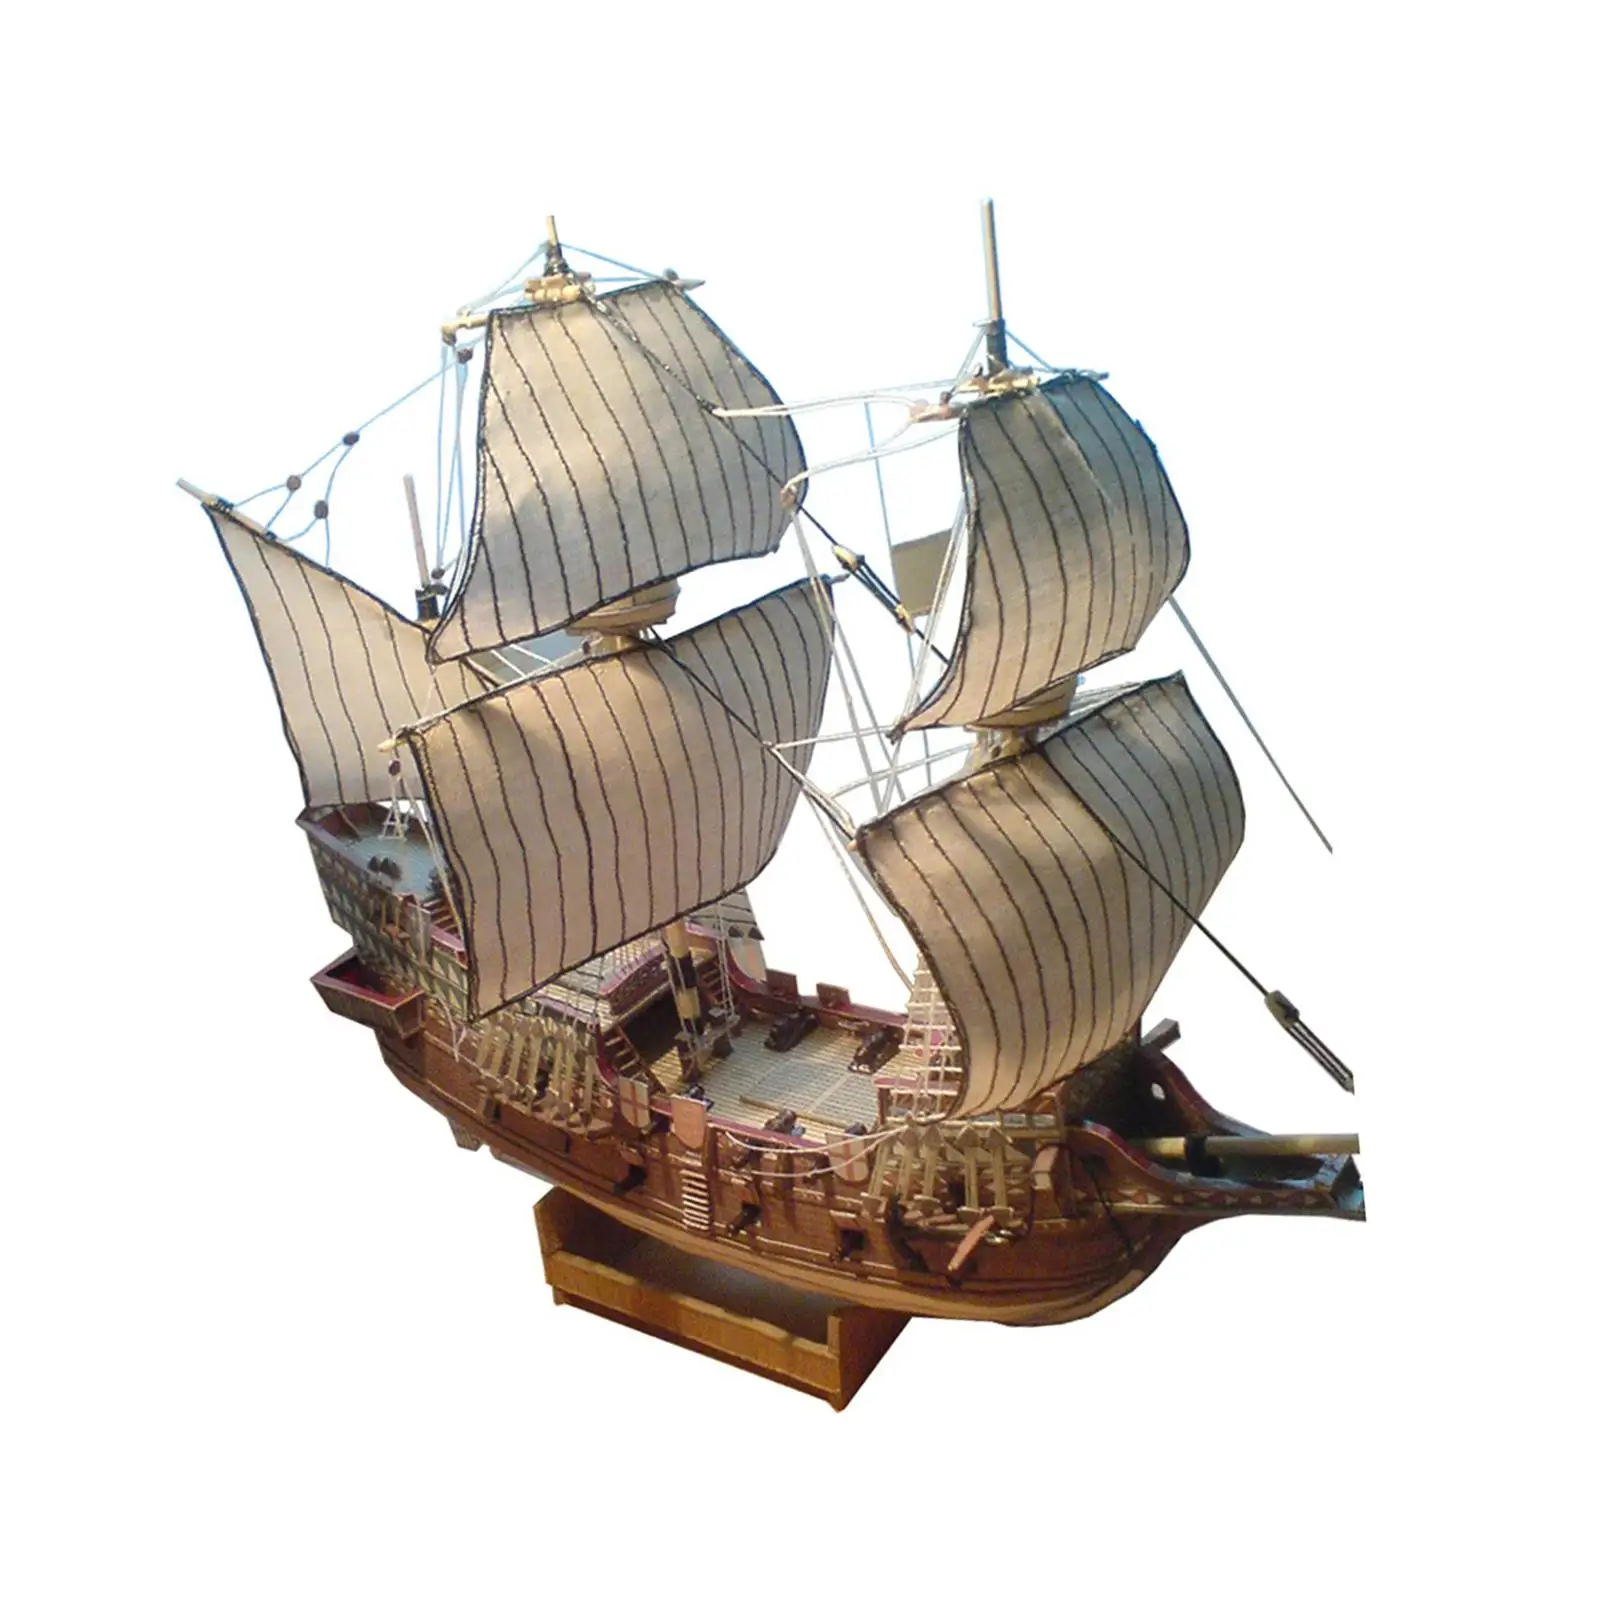 DIY Ship Craft Collections 3D Puzzle Ship Model Kits Assembly Model Boat Kits 1:100 Scale Paper Sailboat Ship Kits for Adults